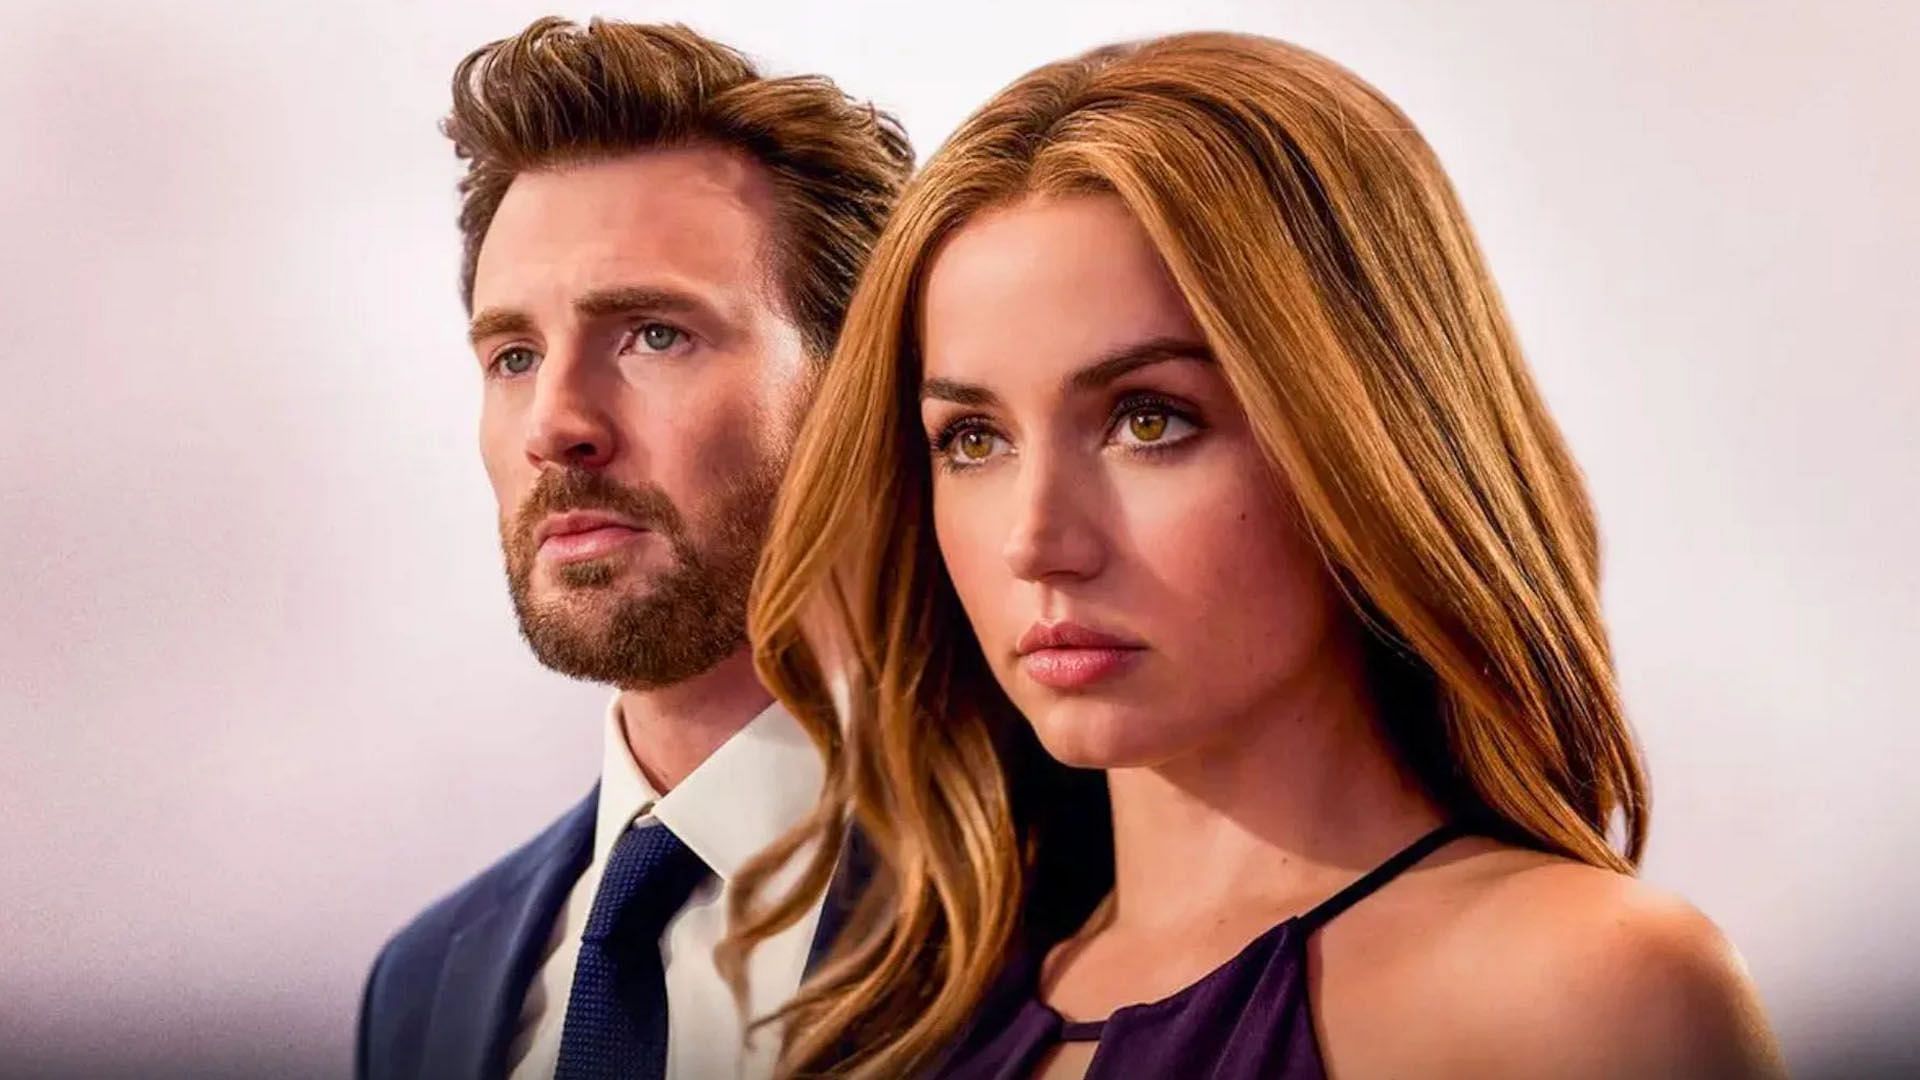 Chris Evans and Ana de Armas star in Ghosted (Image via Apple TV+)